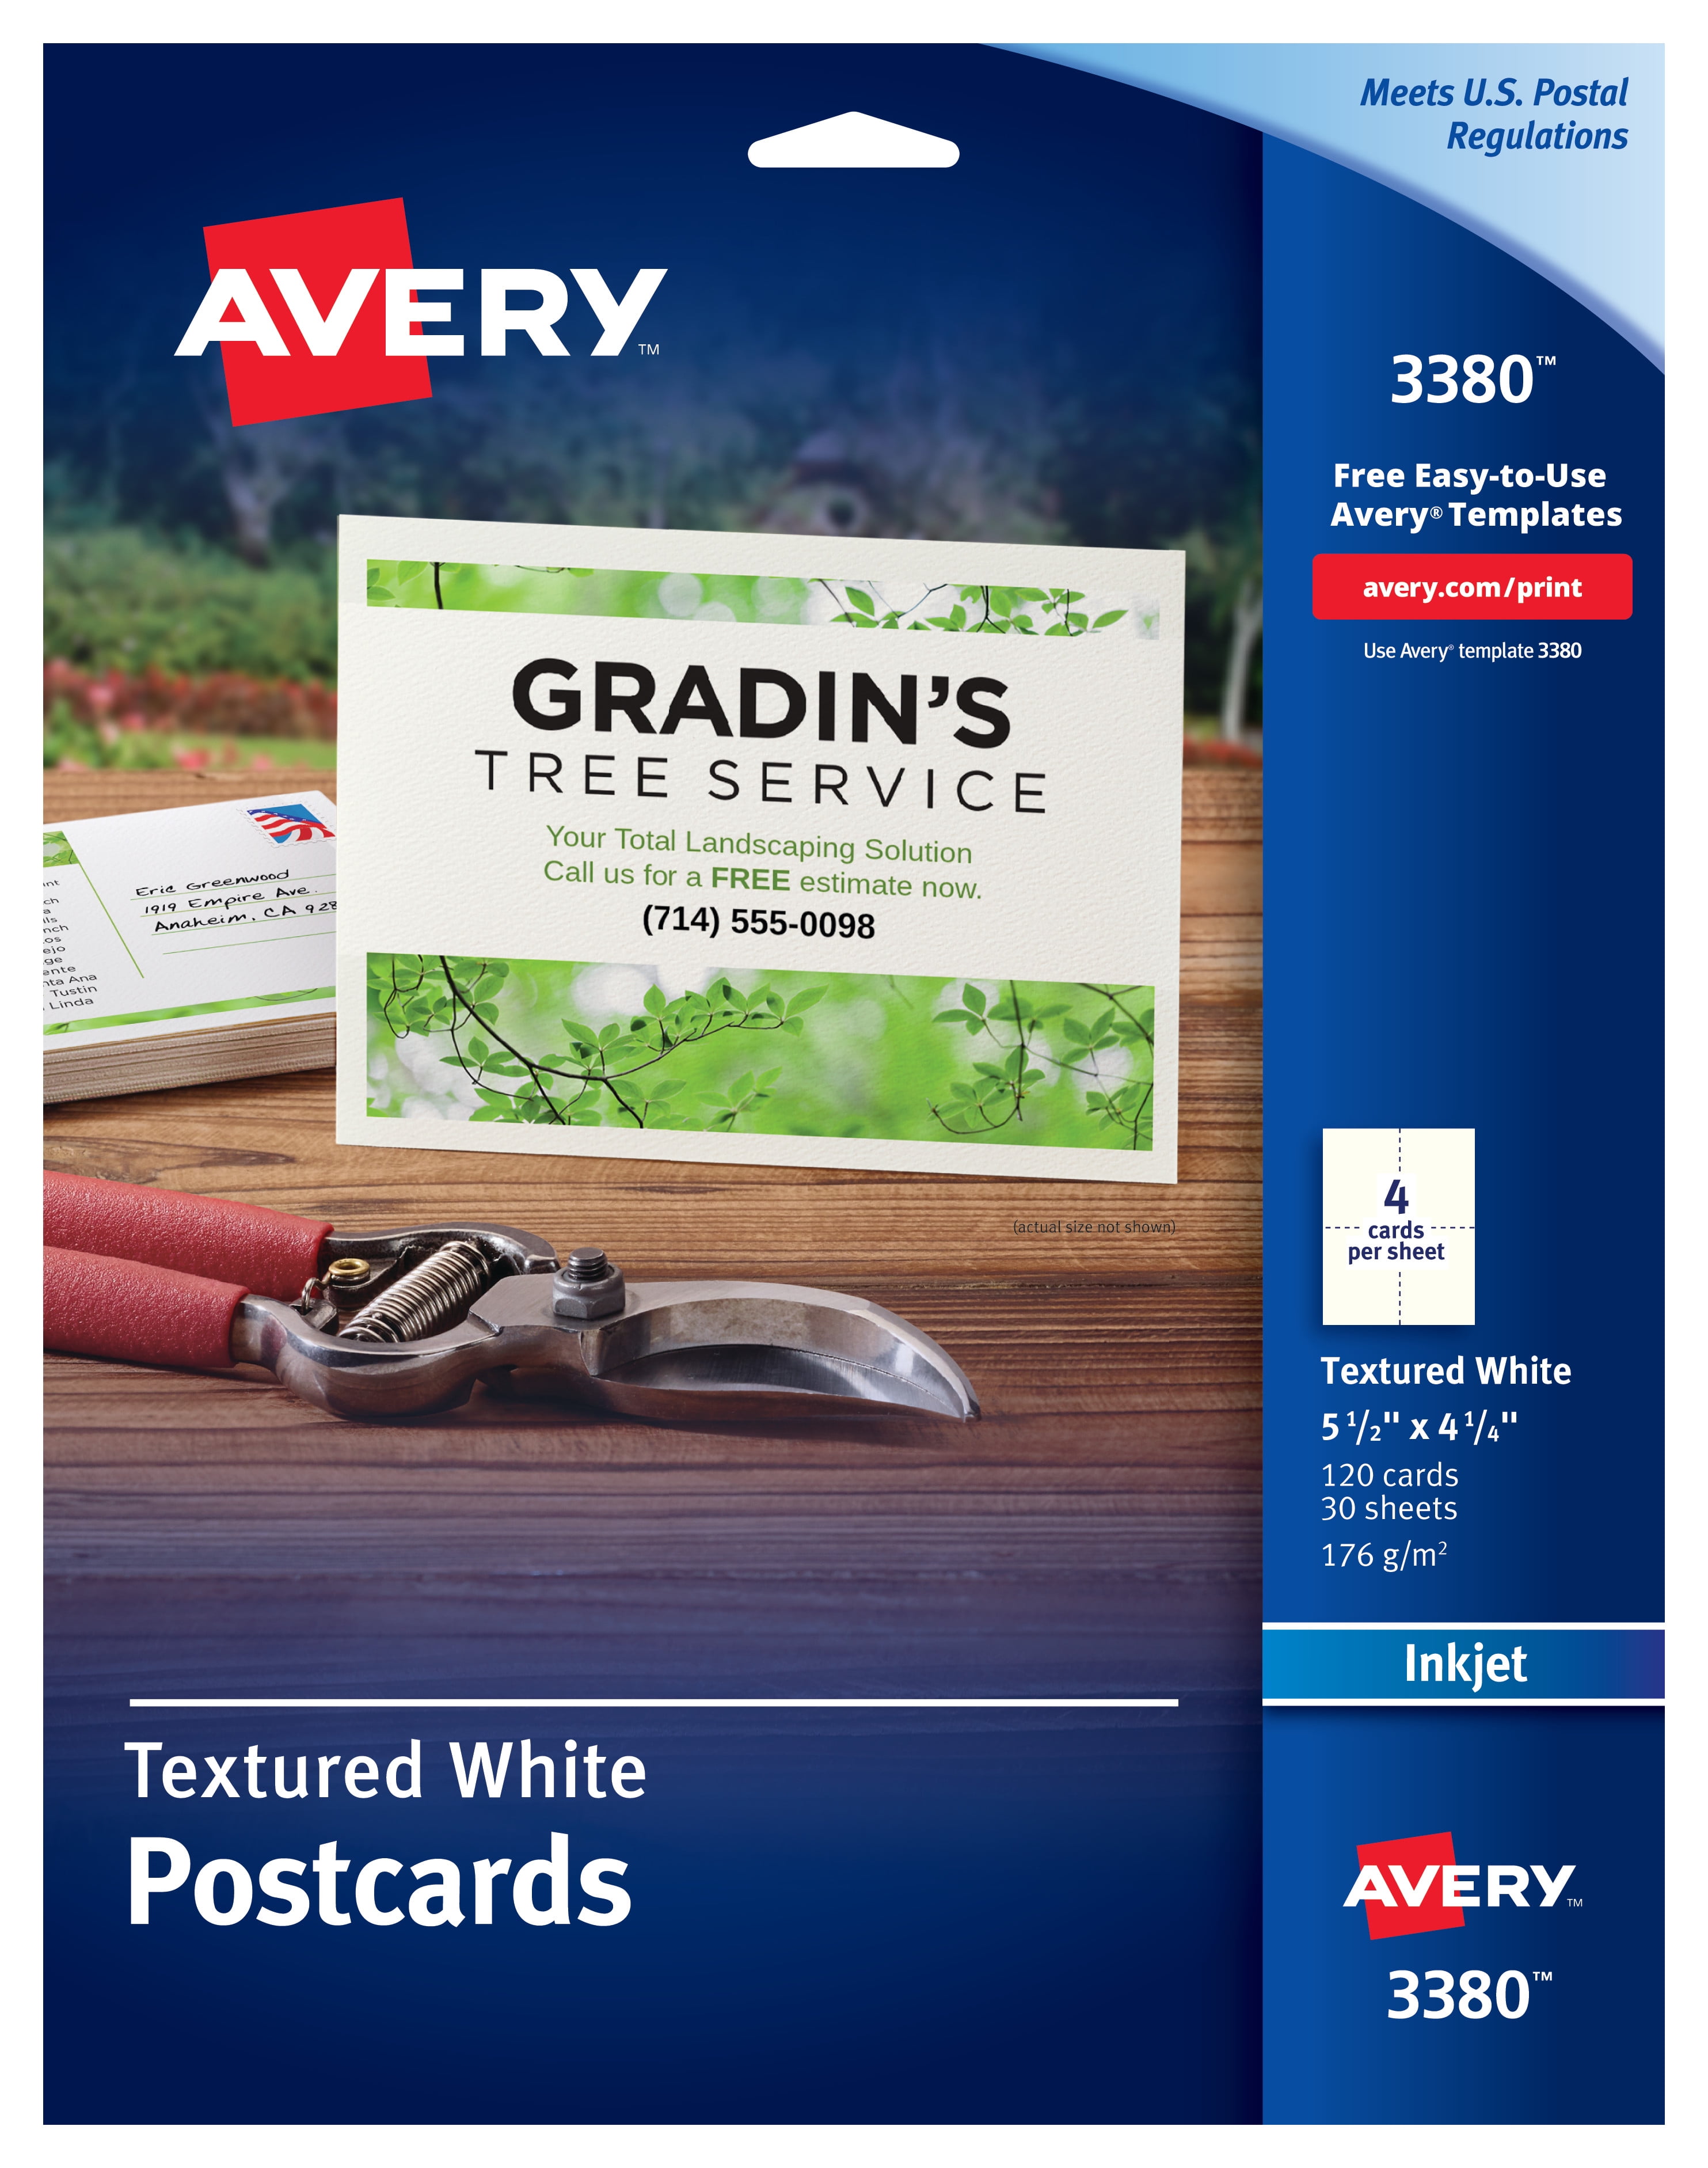 Avery Postcards, Matte, Two-Sided Printing, 22122121-22121/221" x 221-22121/221", 221212210 Cards  (21) Inside 4 To A Page Postcard Template